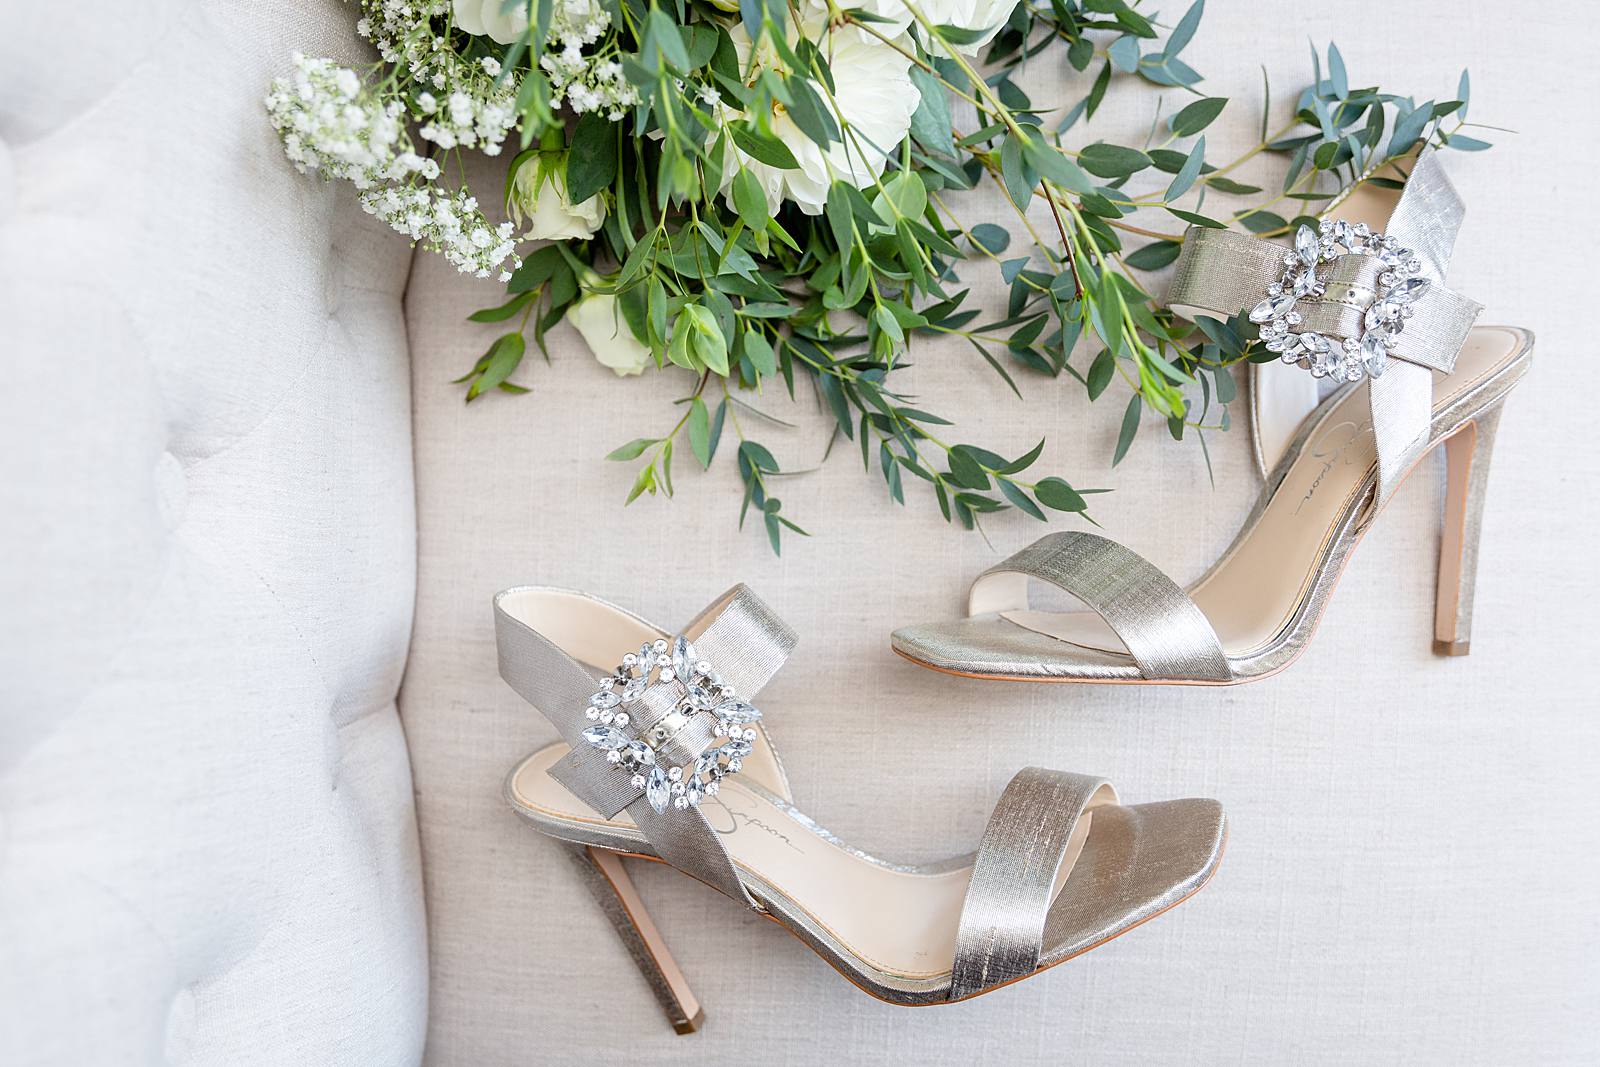 Jessica Simpson silver shoes in Hamilton Ontario wedding by photographer Dylan & Sandra